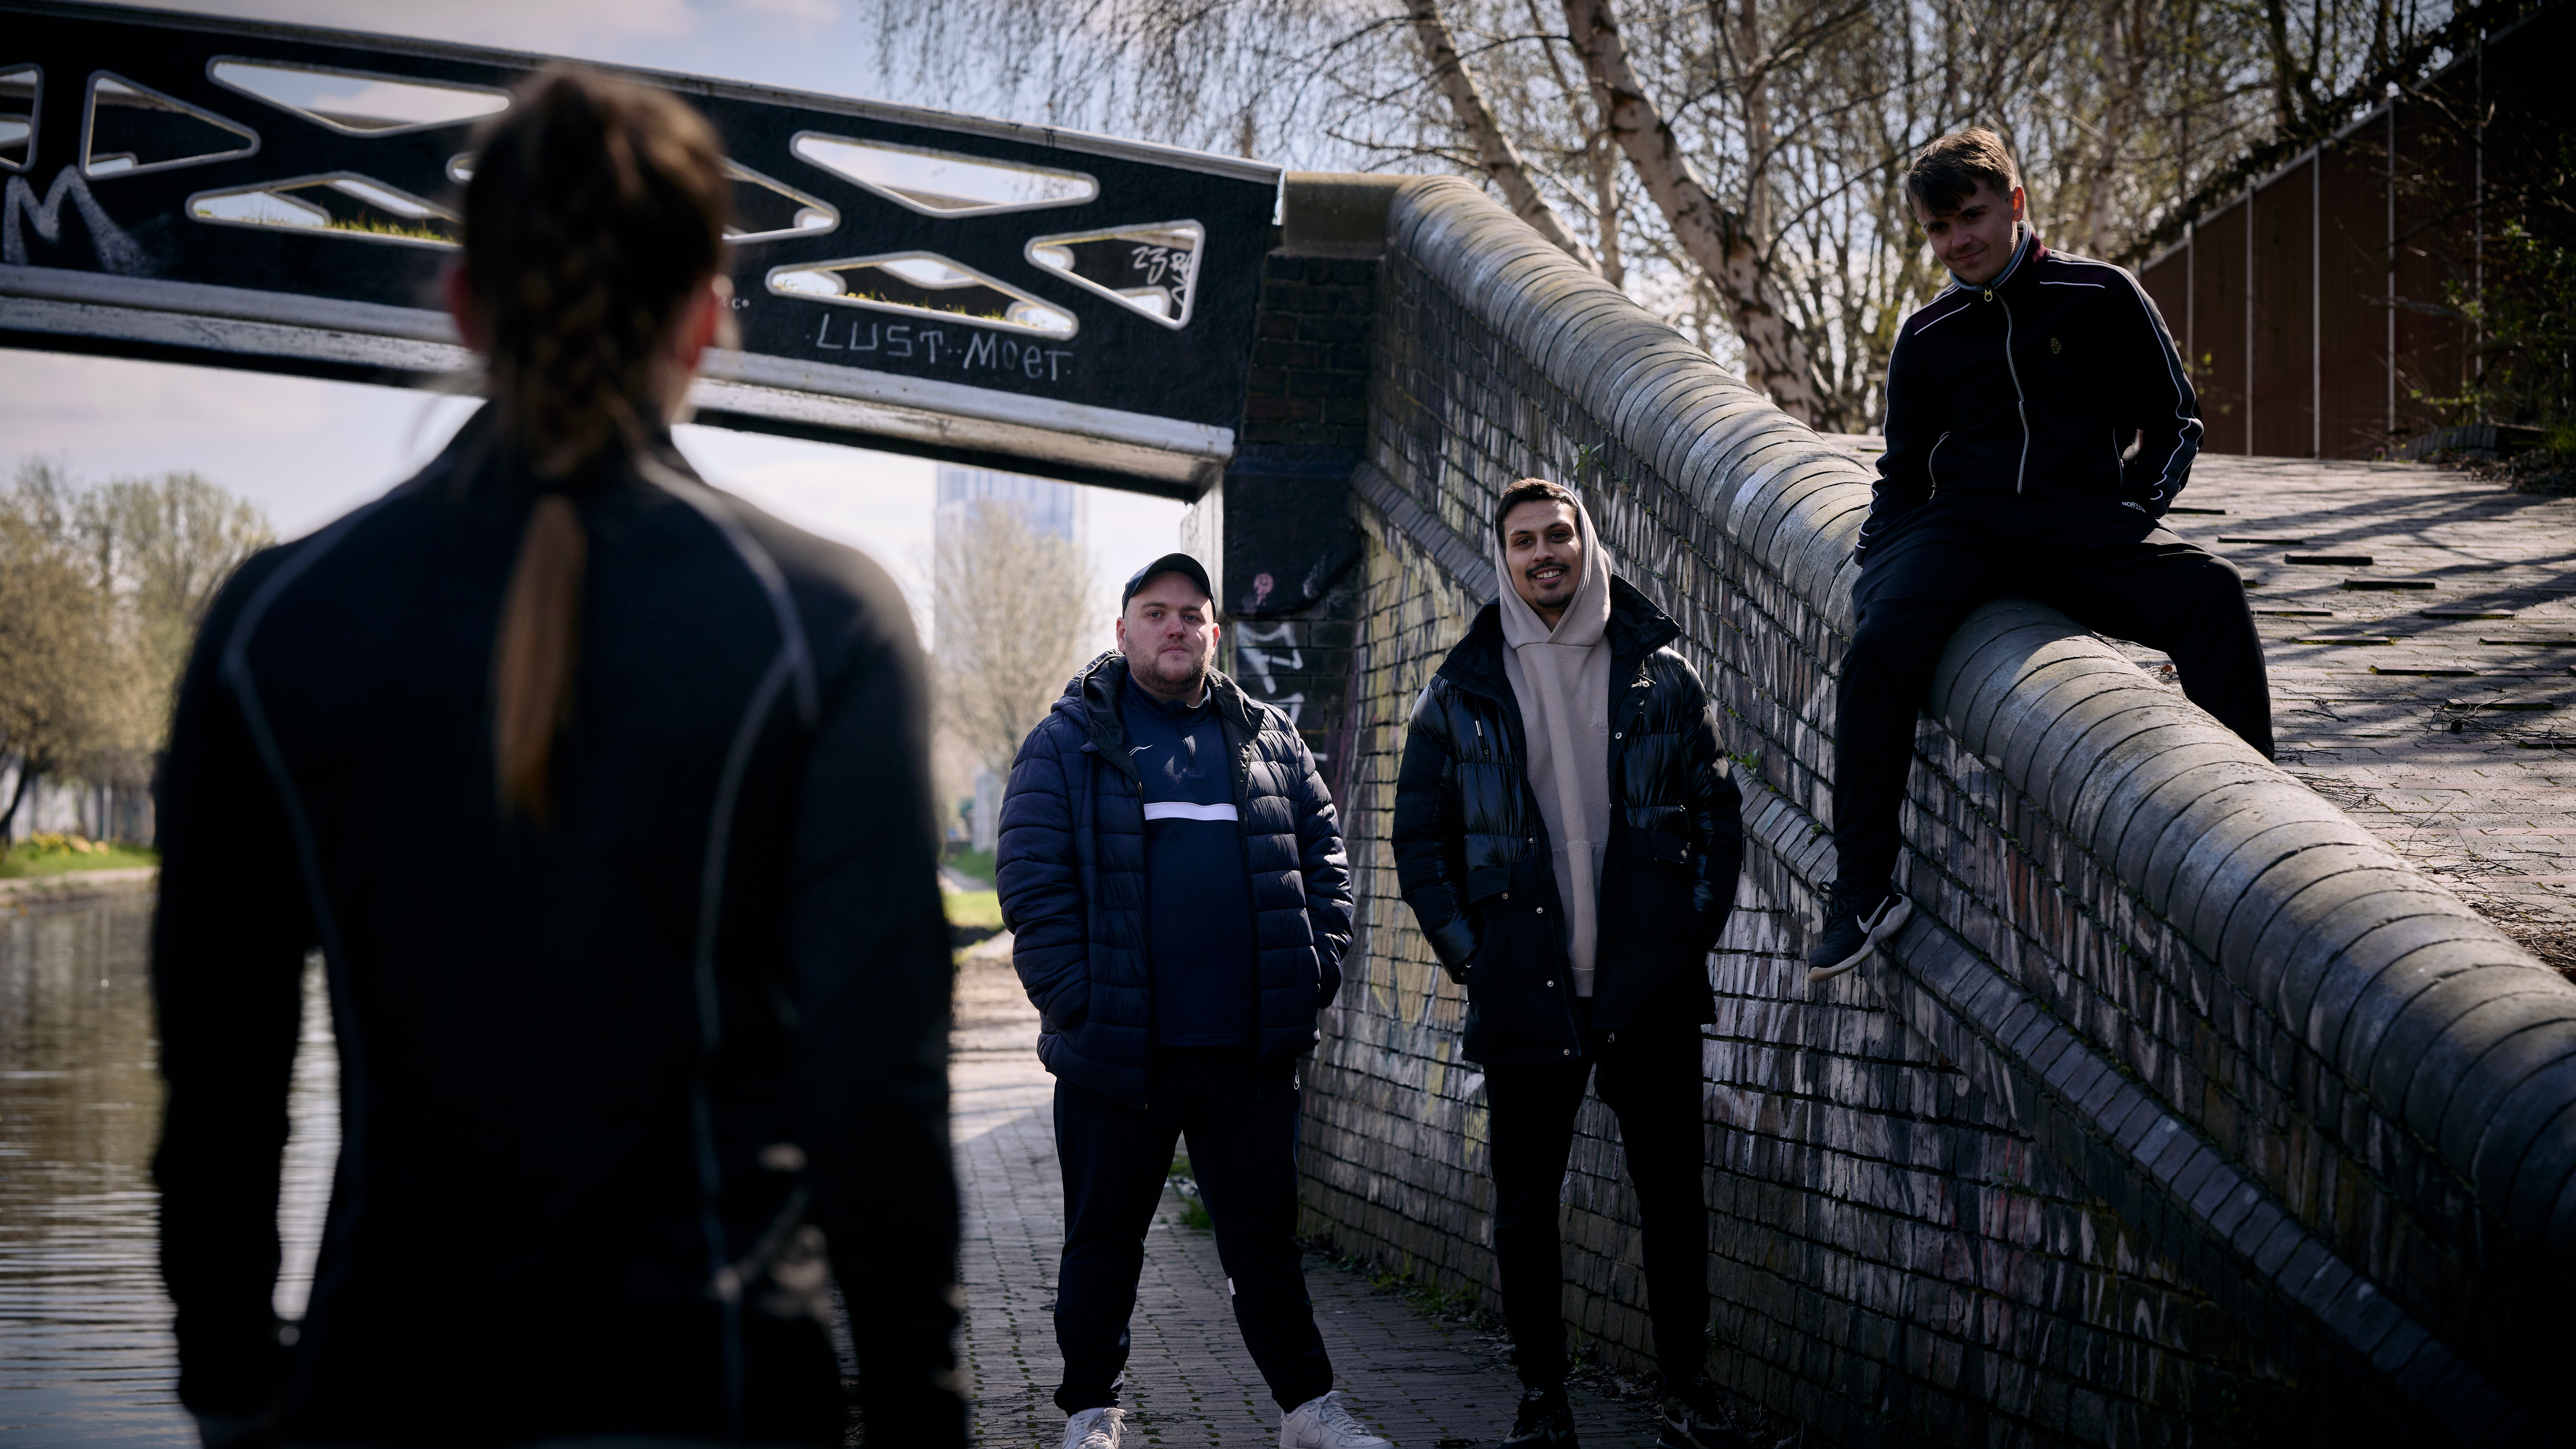 Still from 'I'm Tired Of This' video - a woman on a canal path stops in front of a group of men.